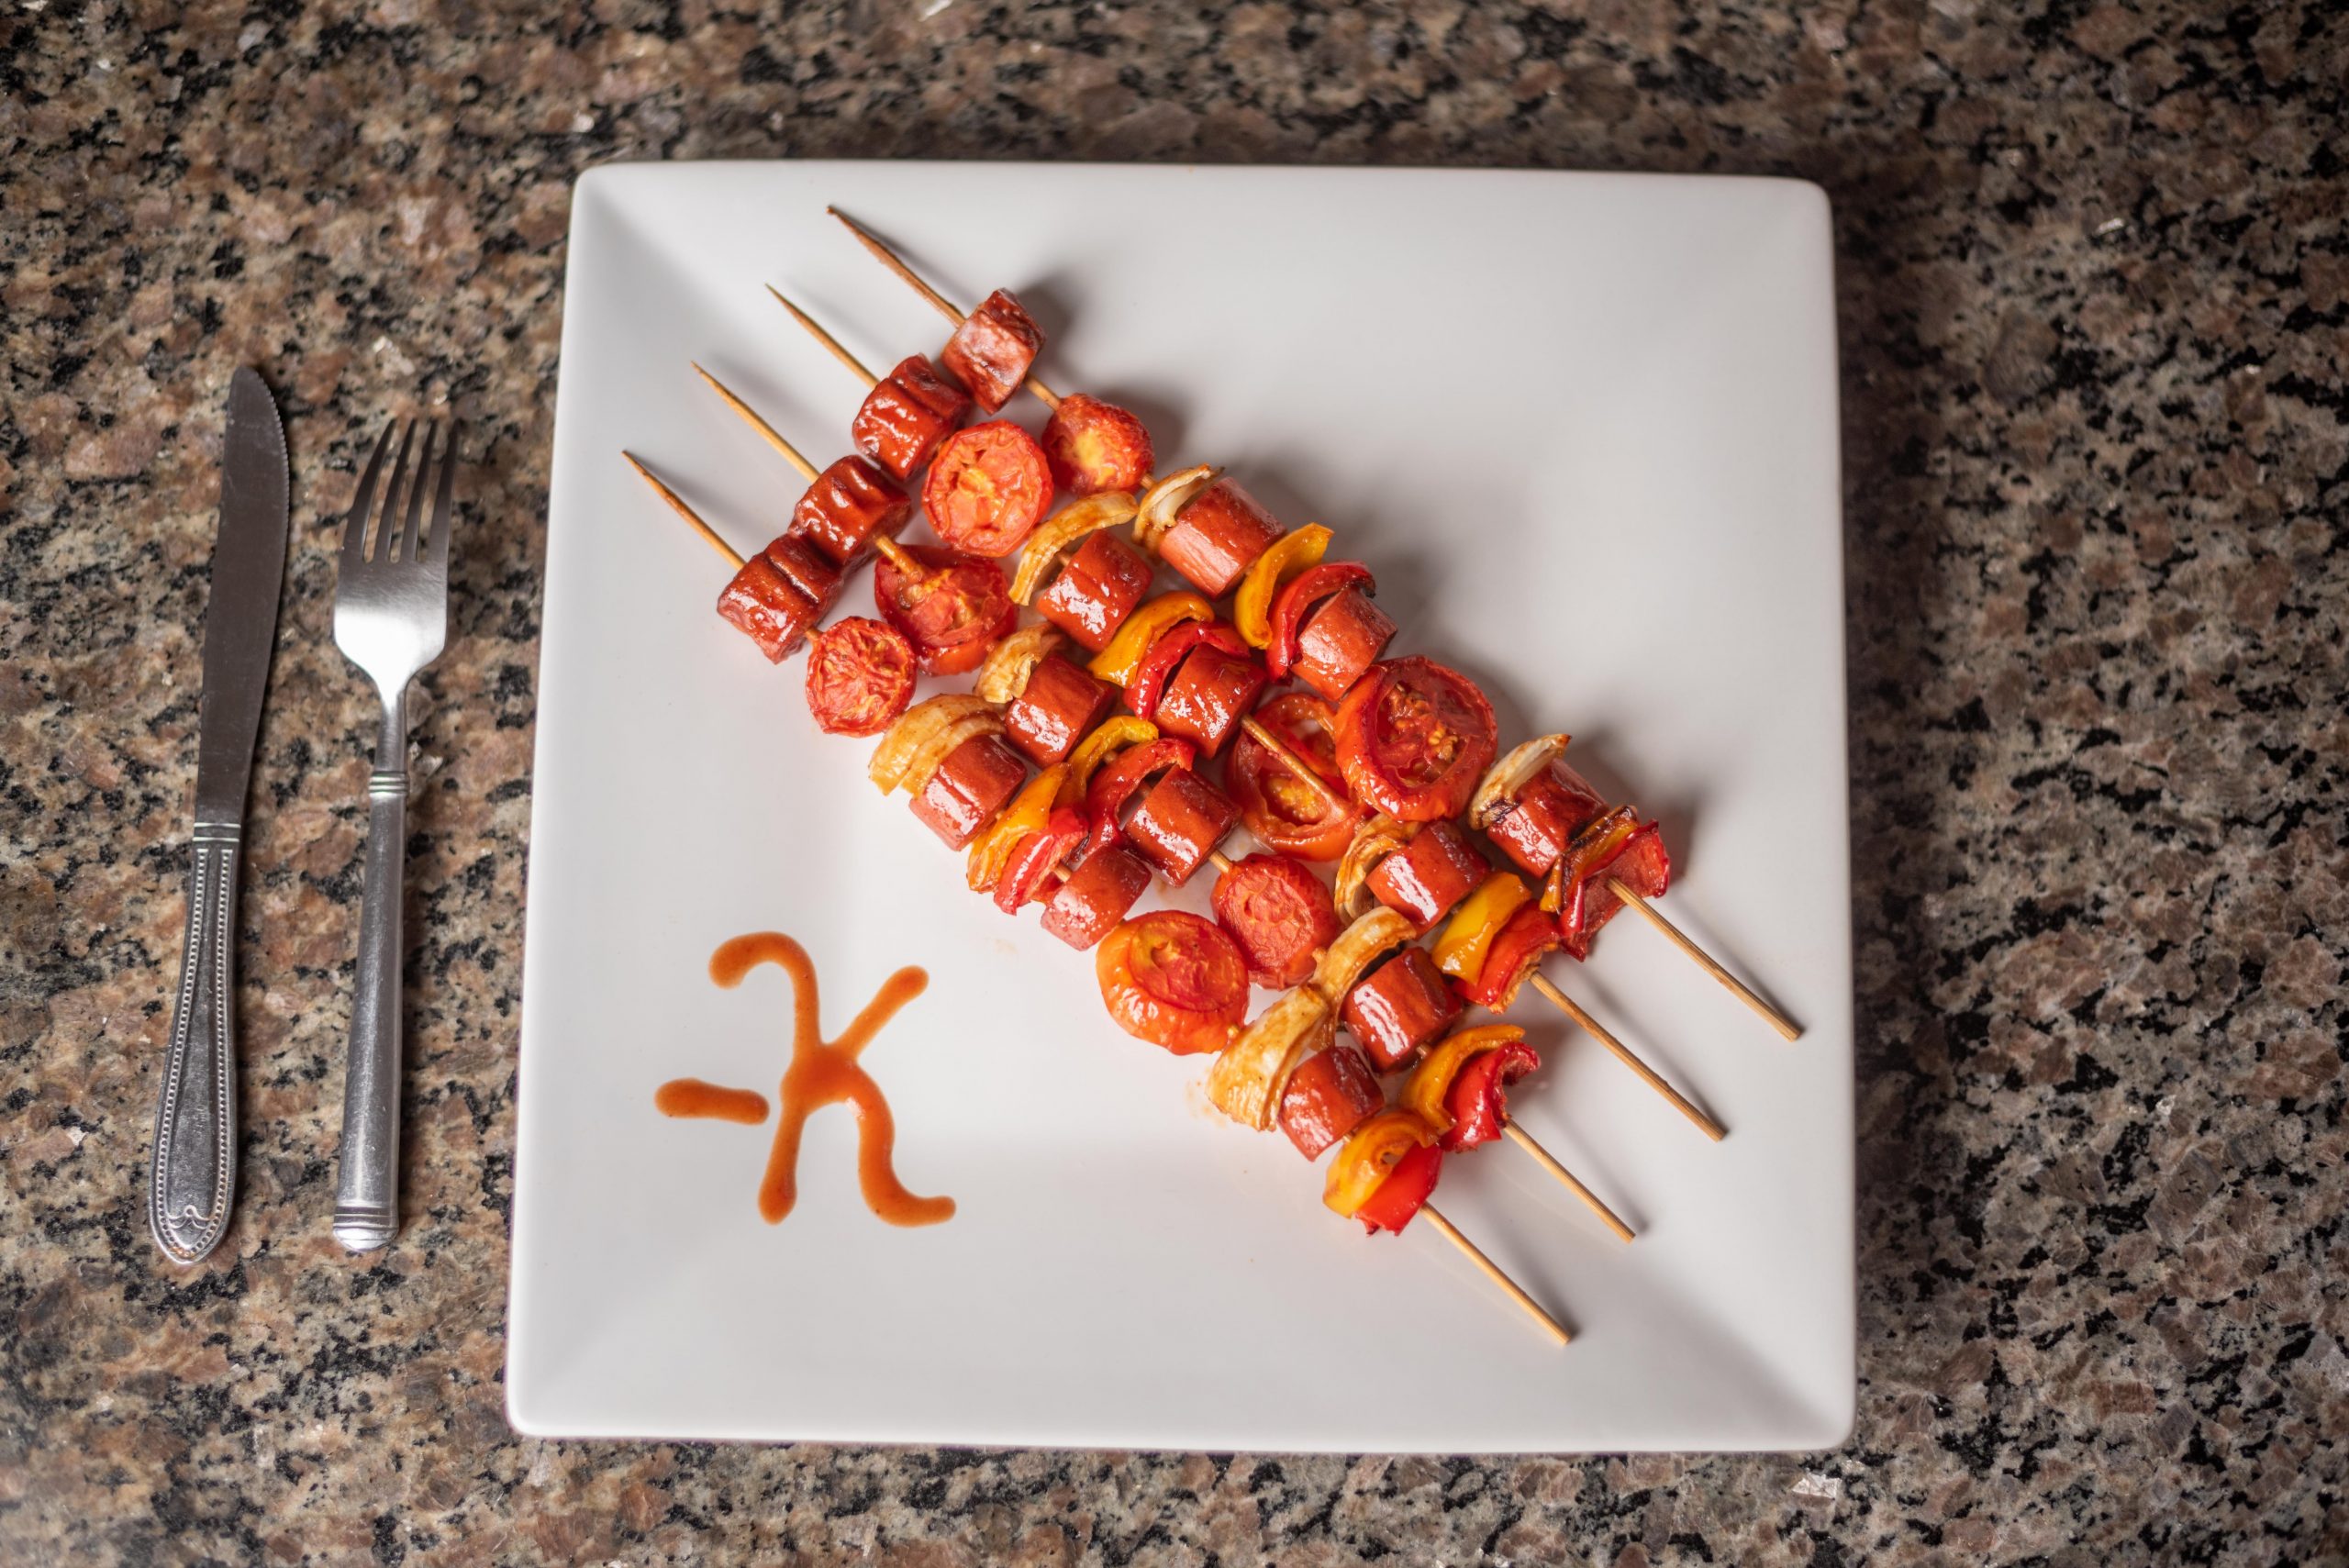 Barbecue Glazed Sausage Kebabs Recipe